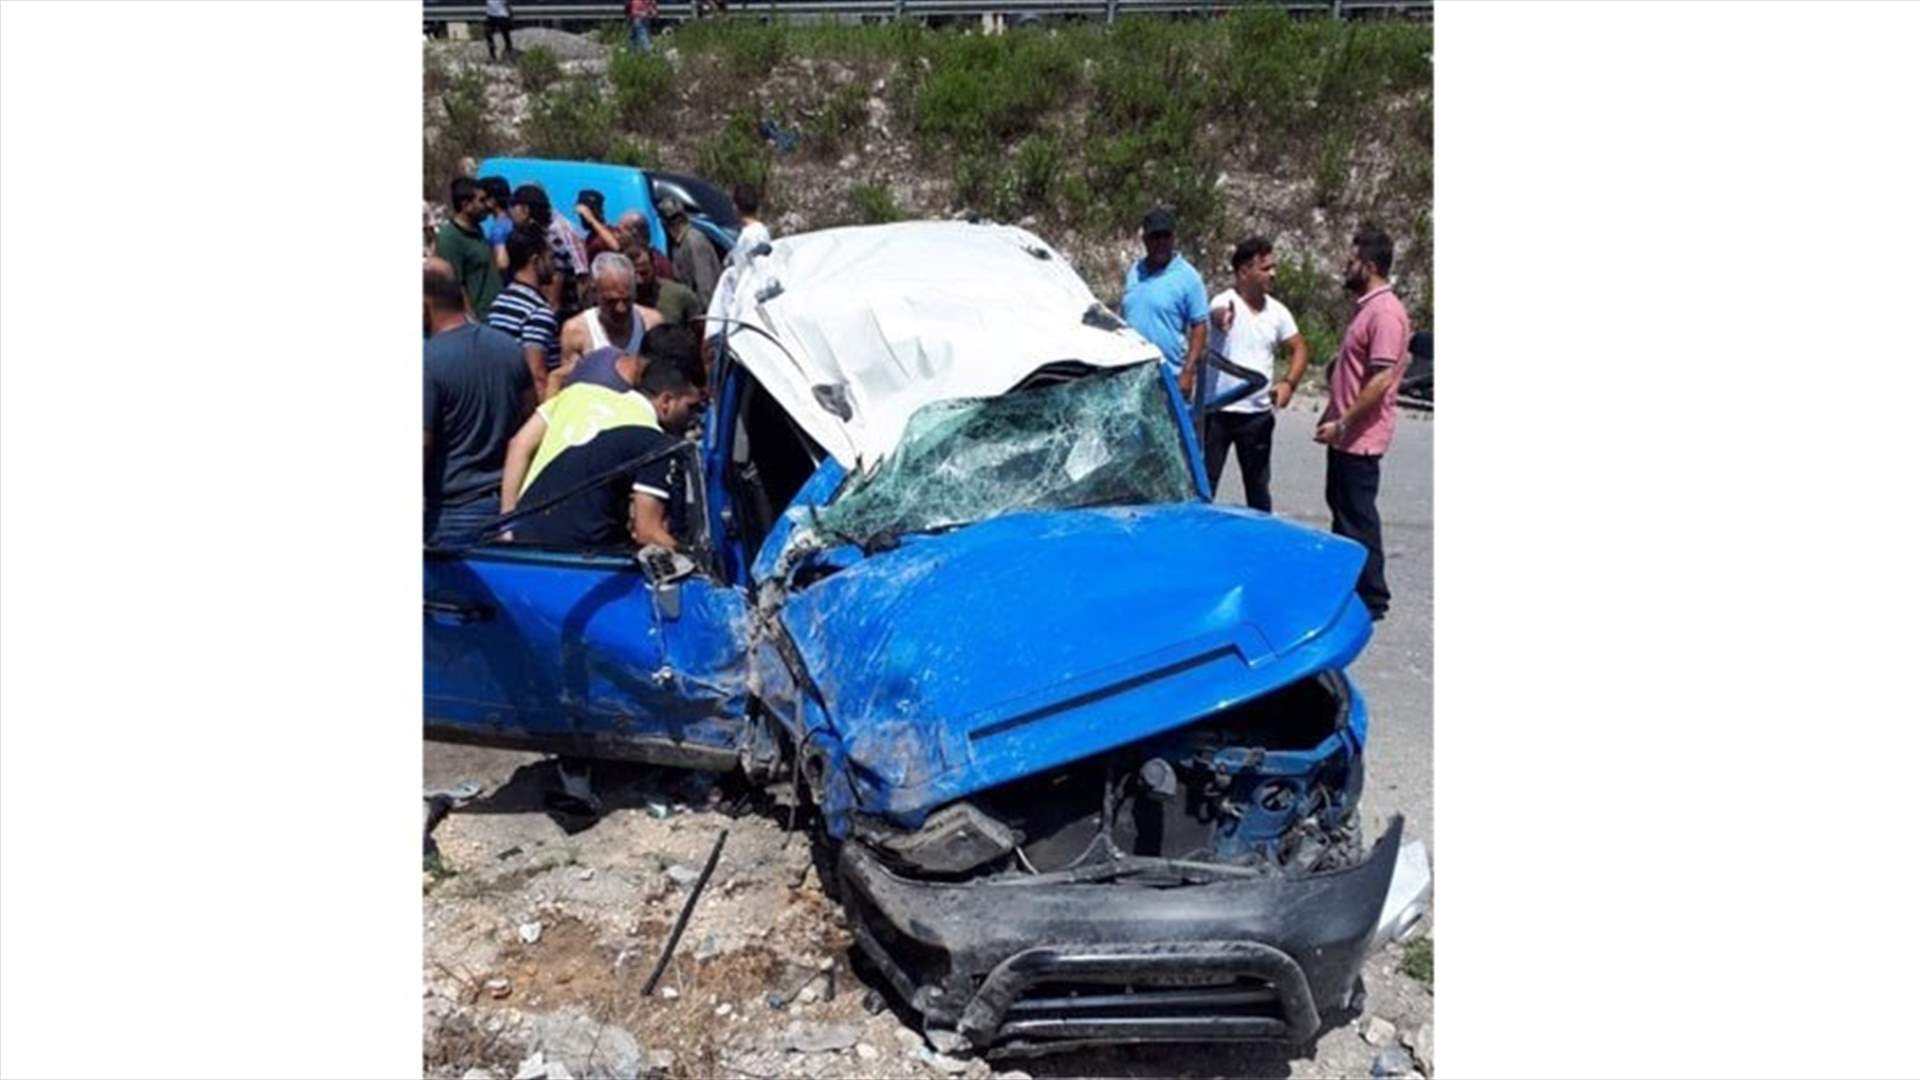 [PHOTO] Car accident leaves one woman injured in Zahrani